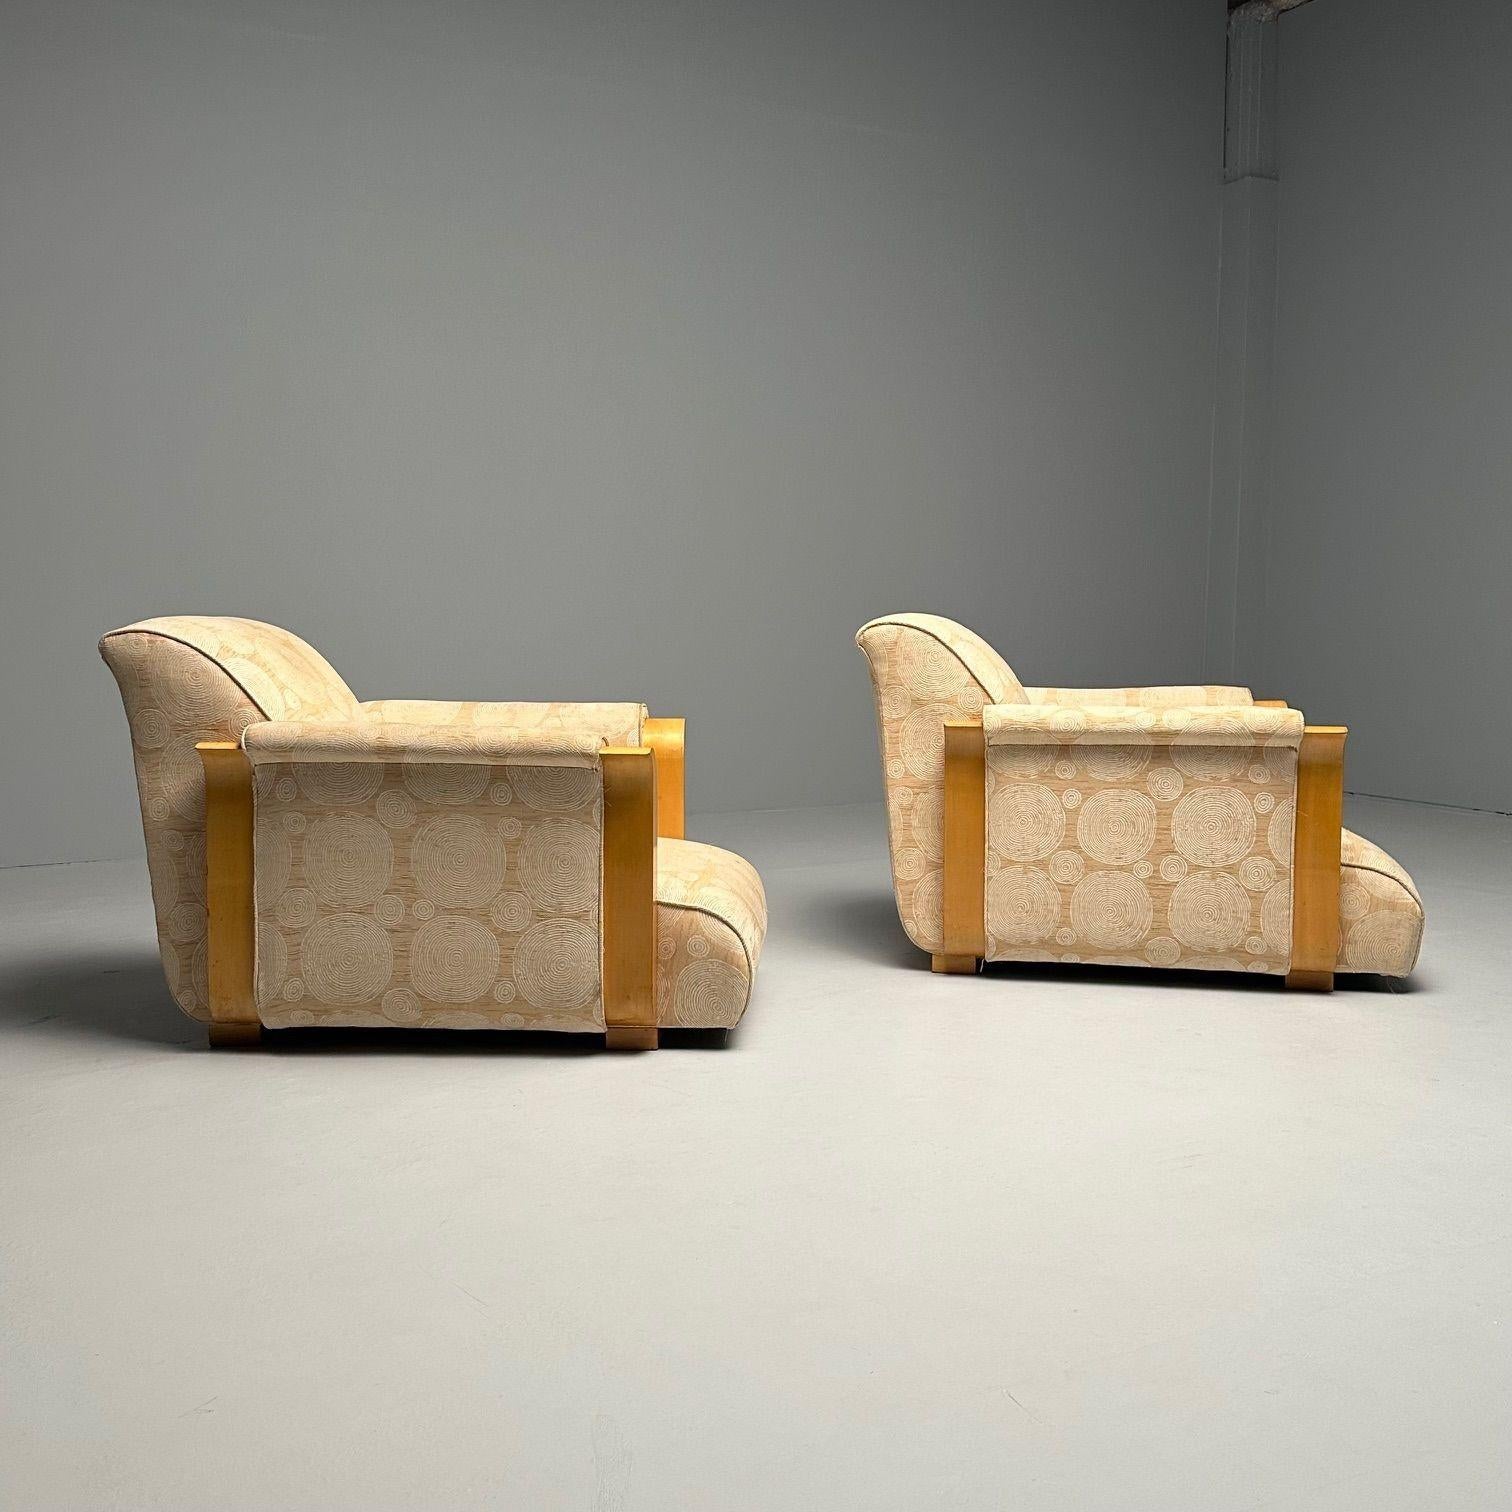 Fabric Rare Pair of French Art Deco Lounge Chairs by Michel Dufet, France, 1930s For Sale